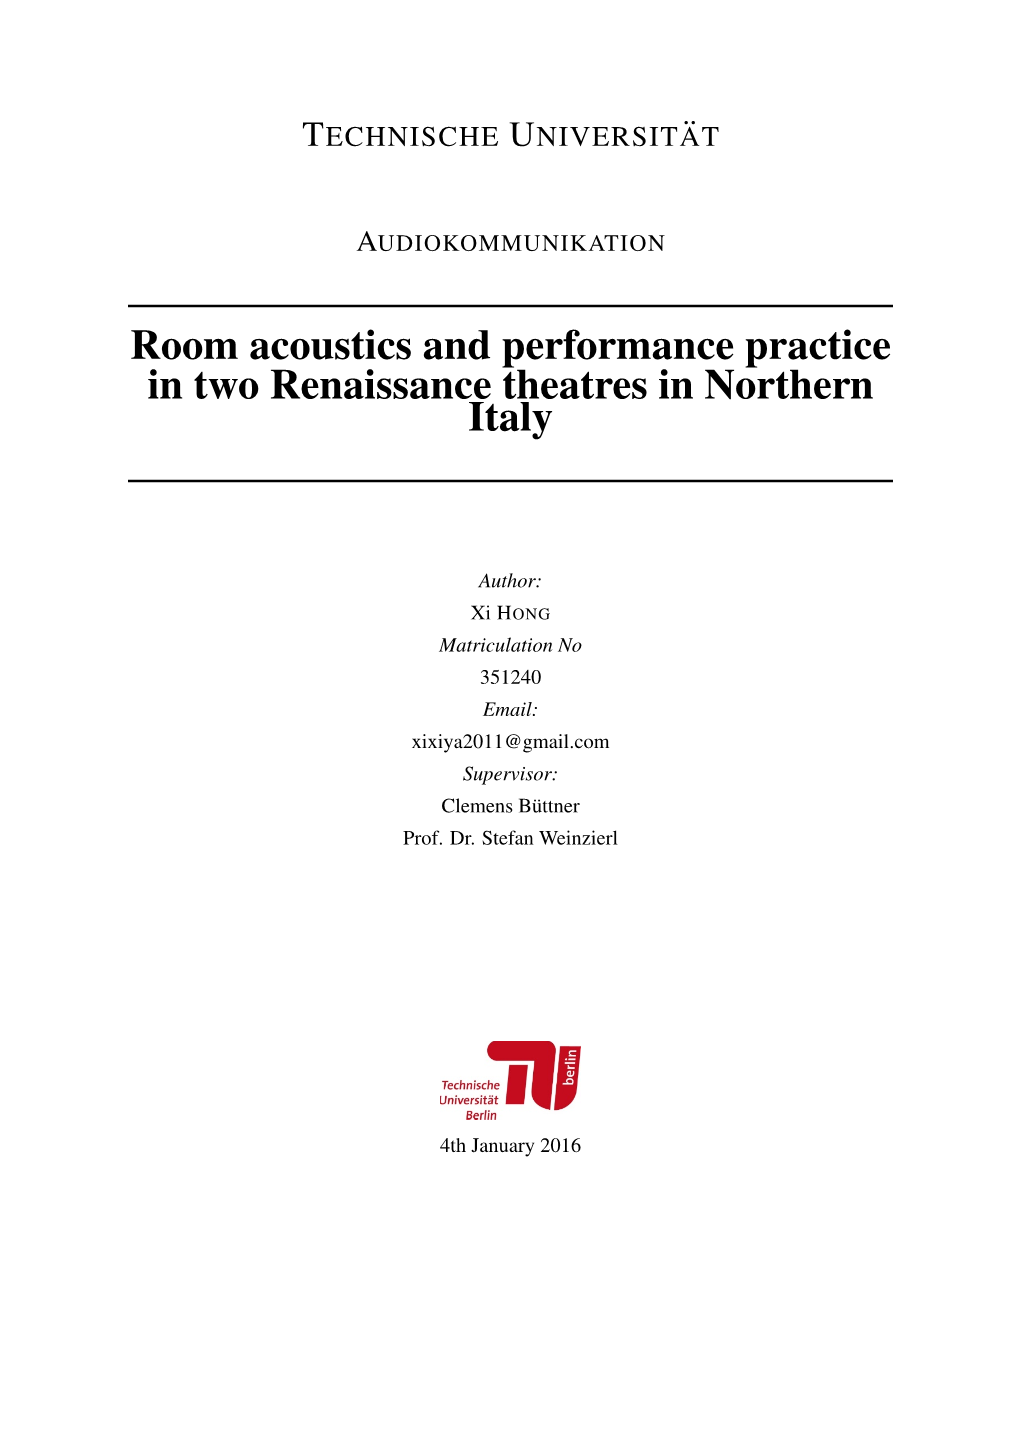 Room Acoustics and Performance Practice in Two Renaissance Theatres in Northern Italy